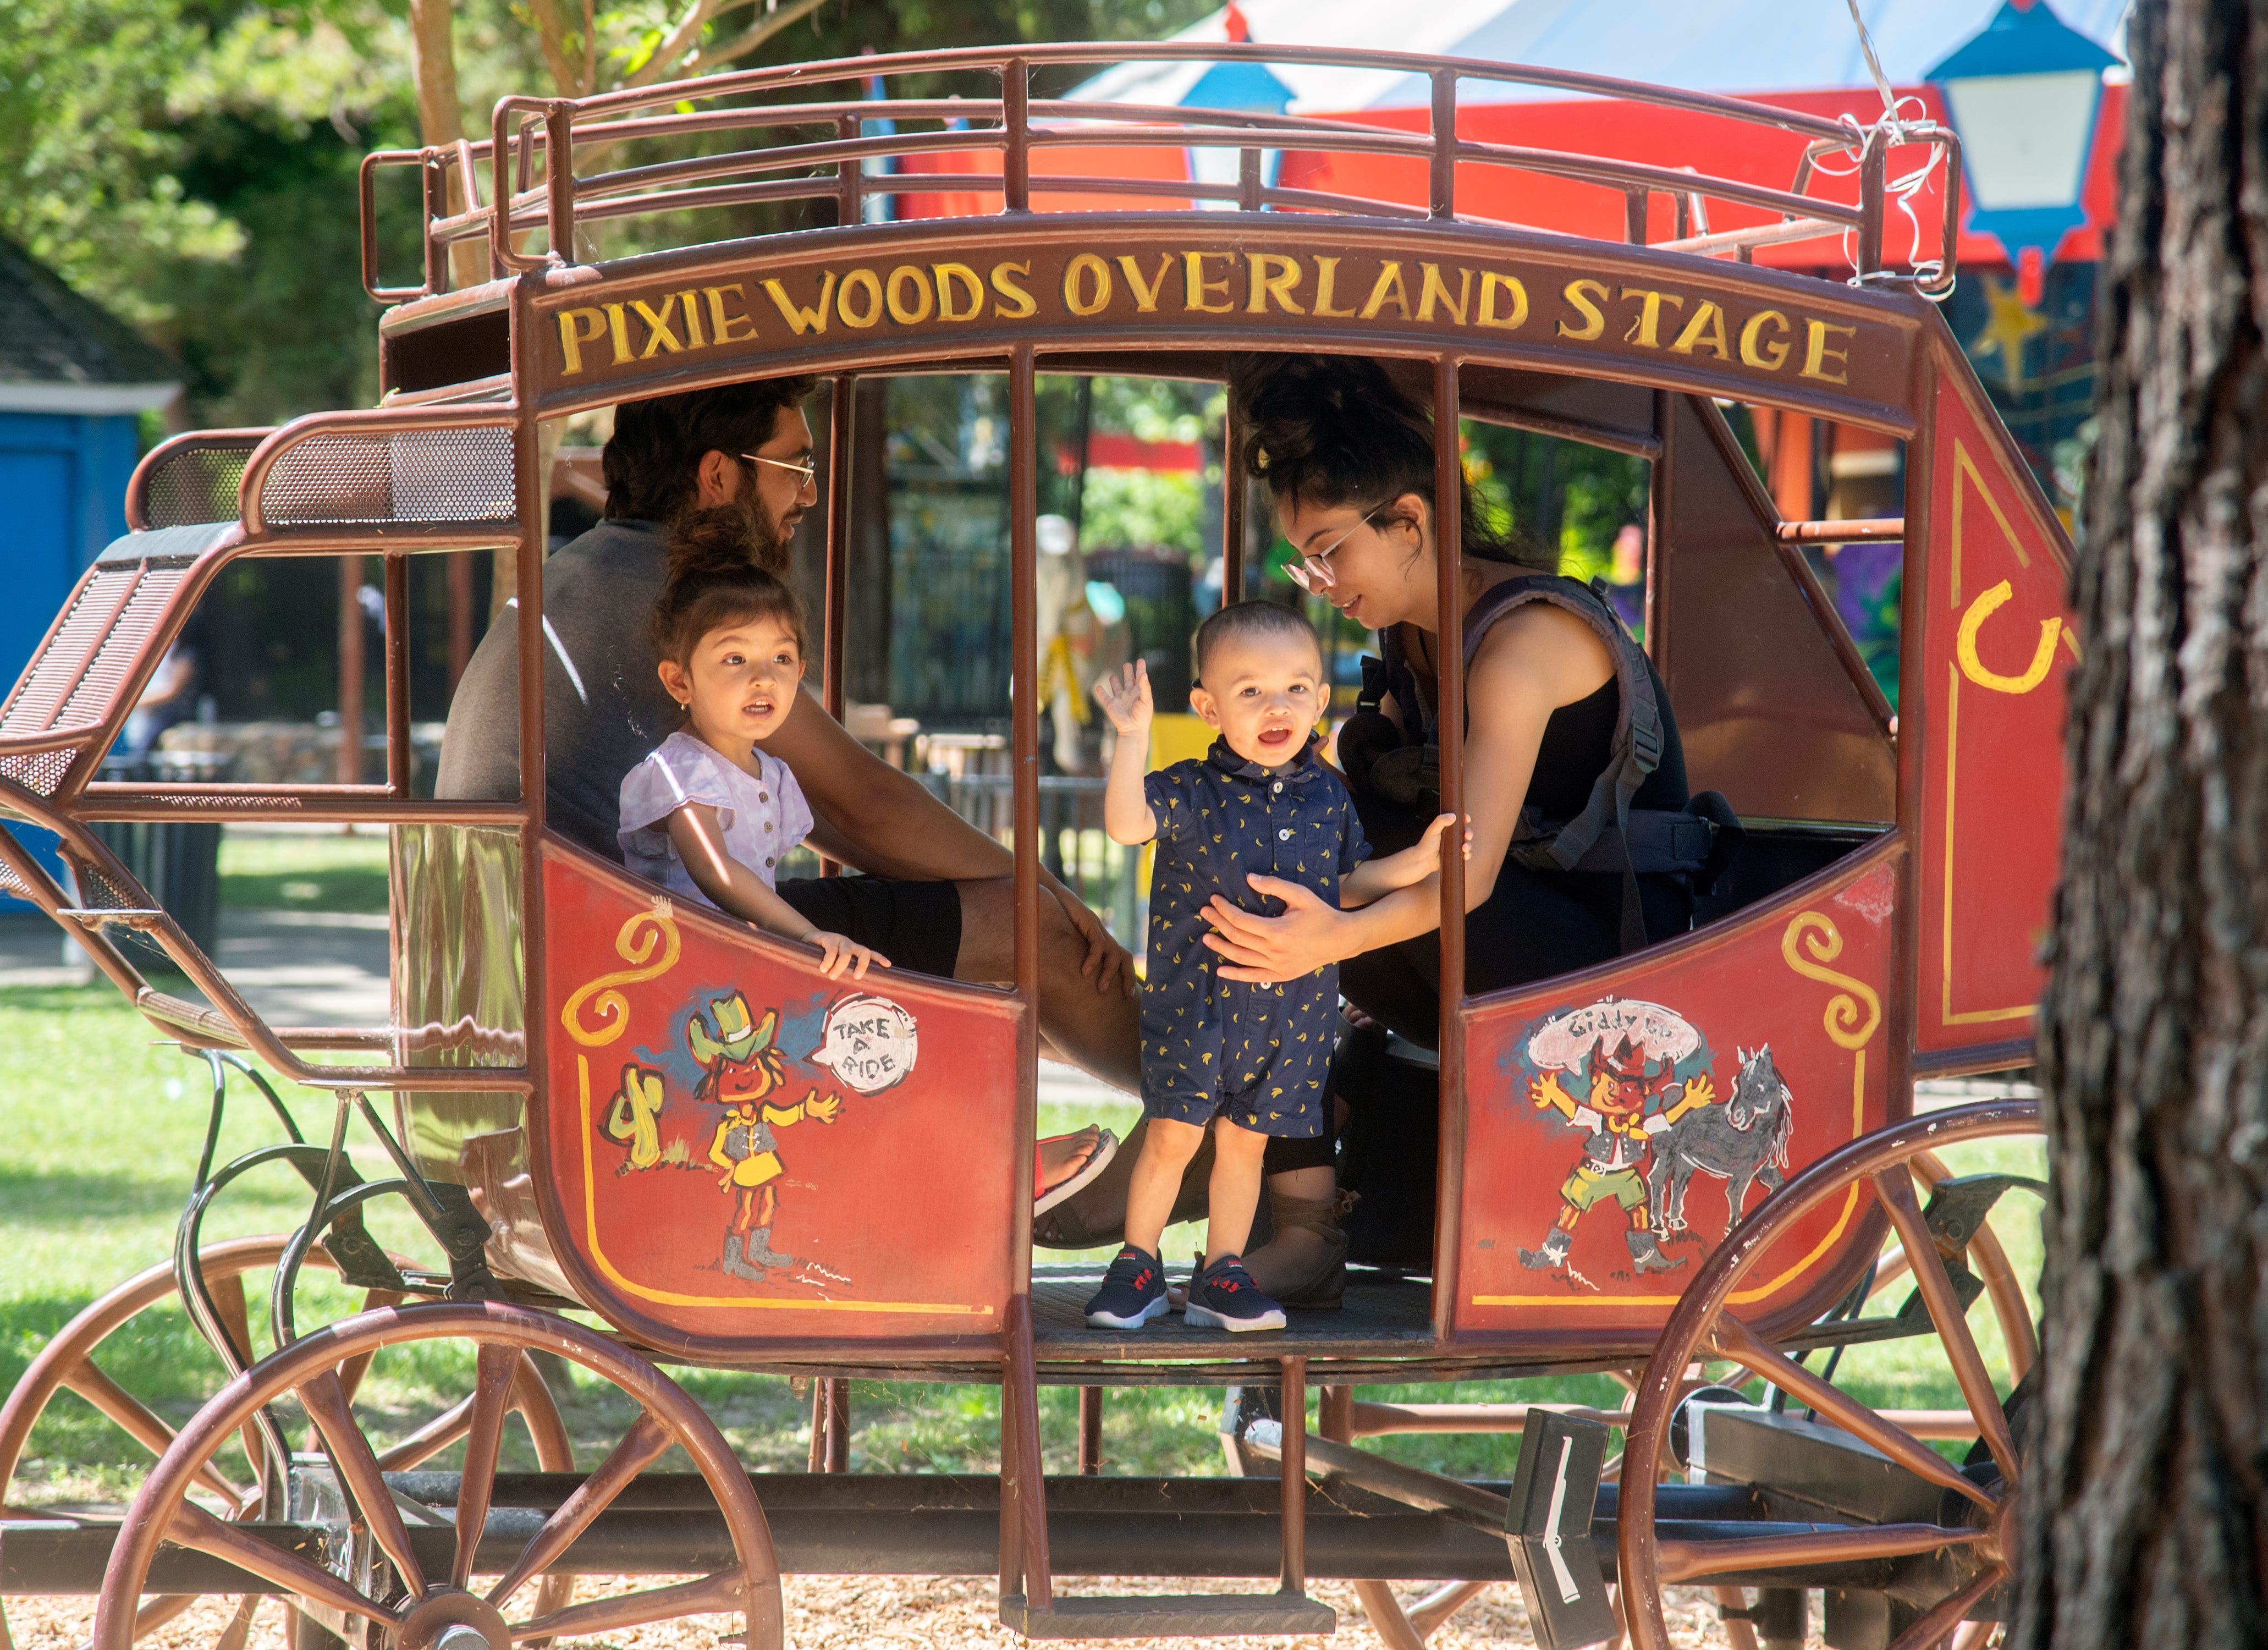 'Enchanted forest and magical pathways': Pixie Woods to celebrate 70 years, opening day Saturday